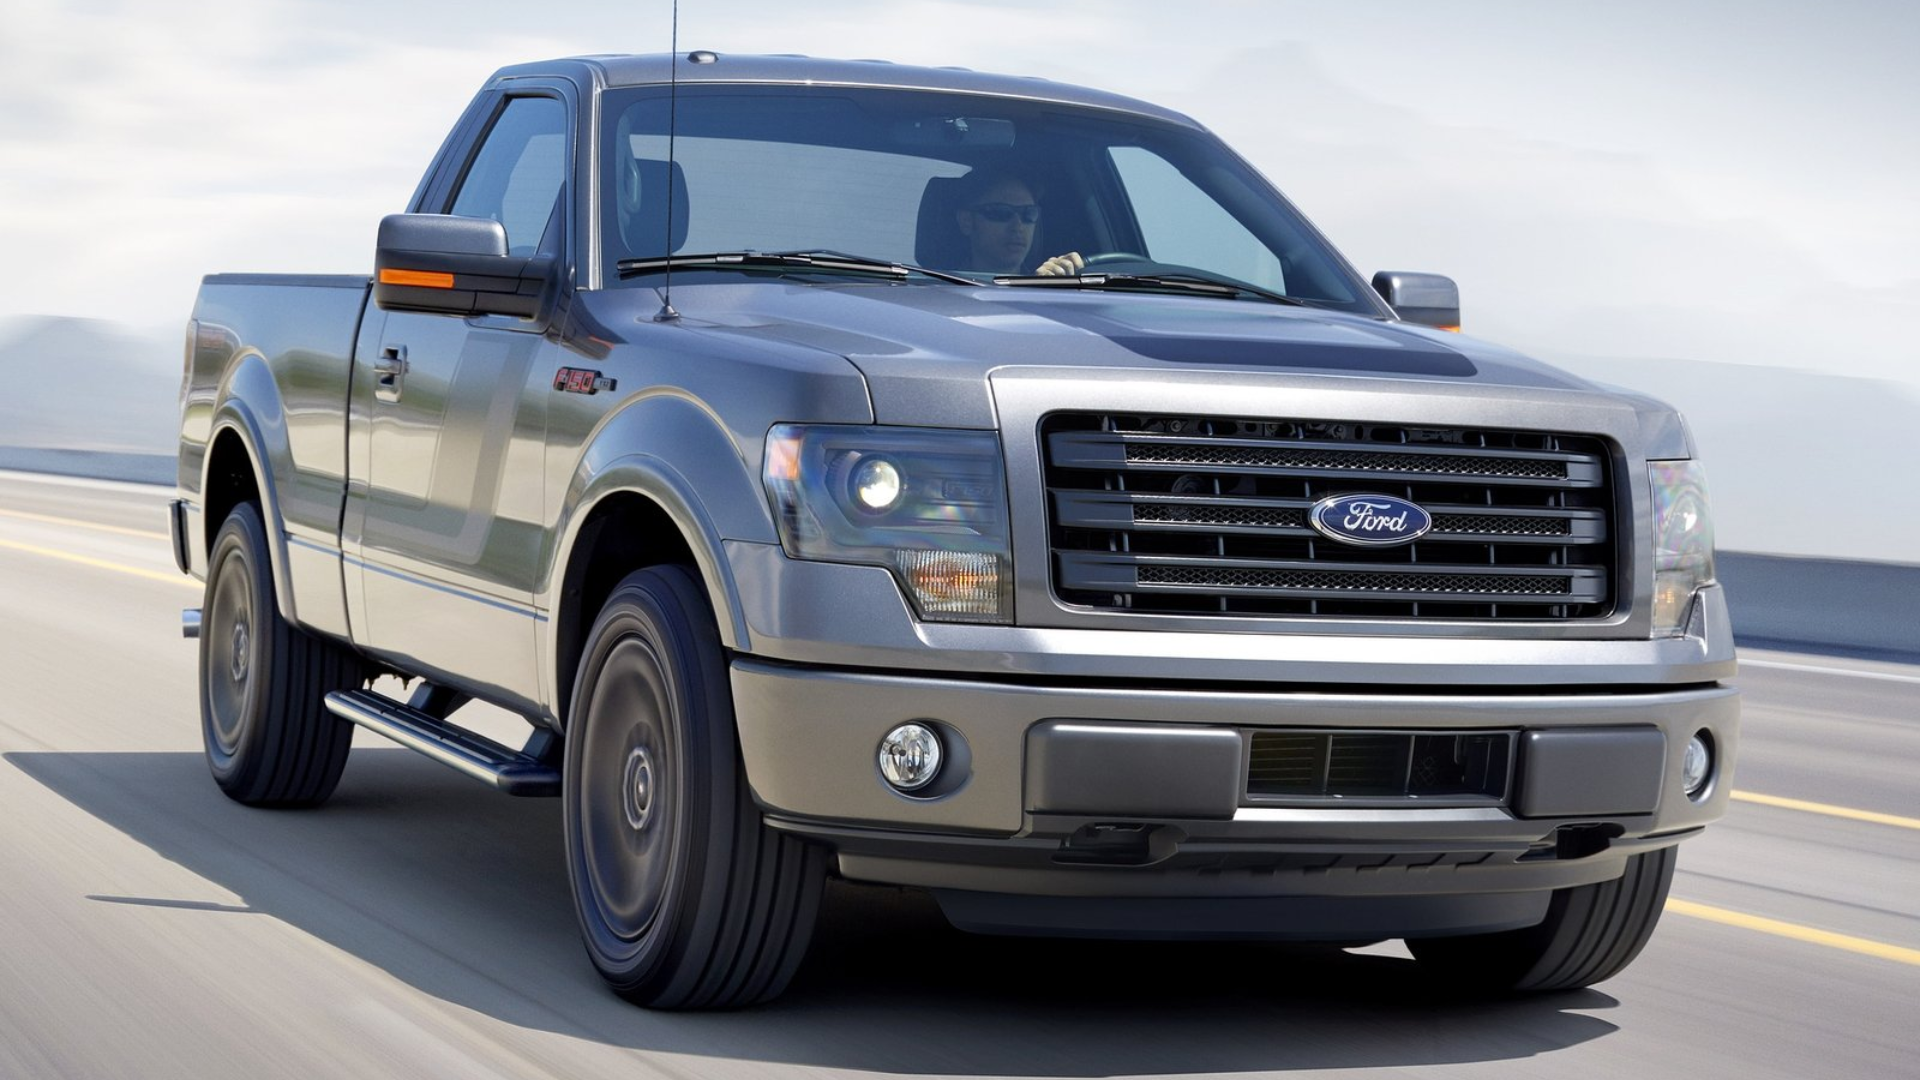 2014 Ford F-150 on highway